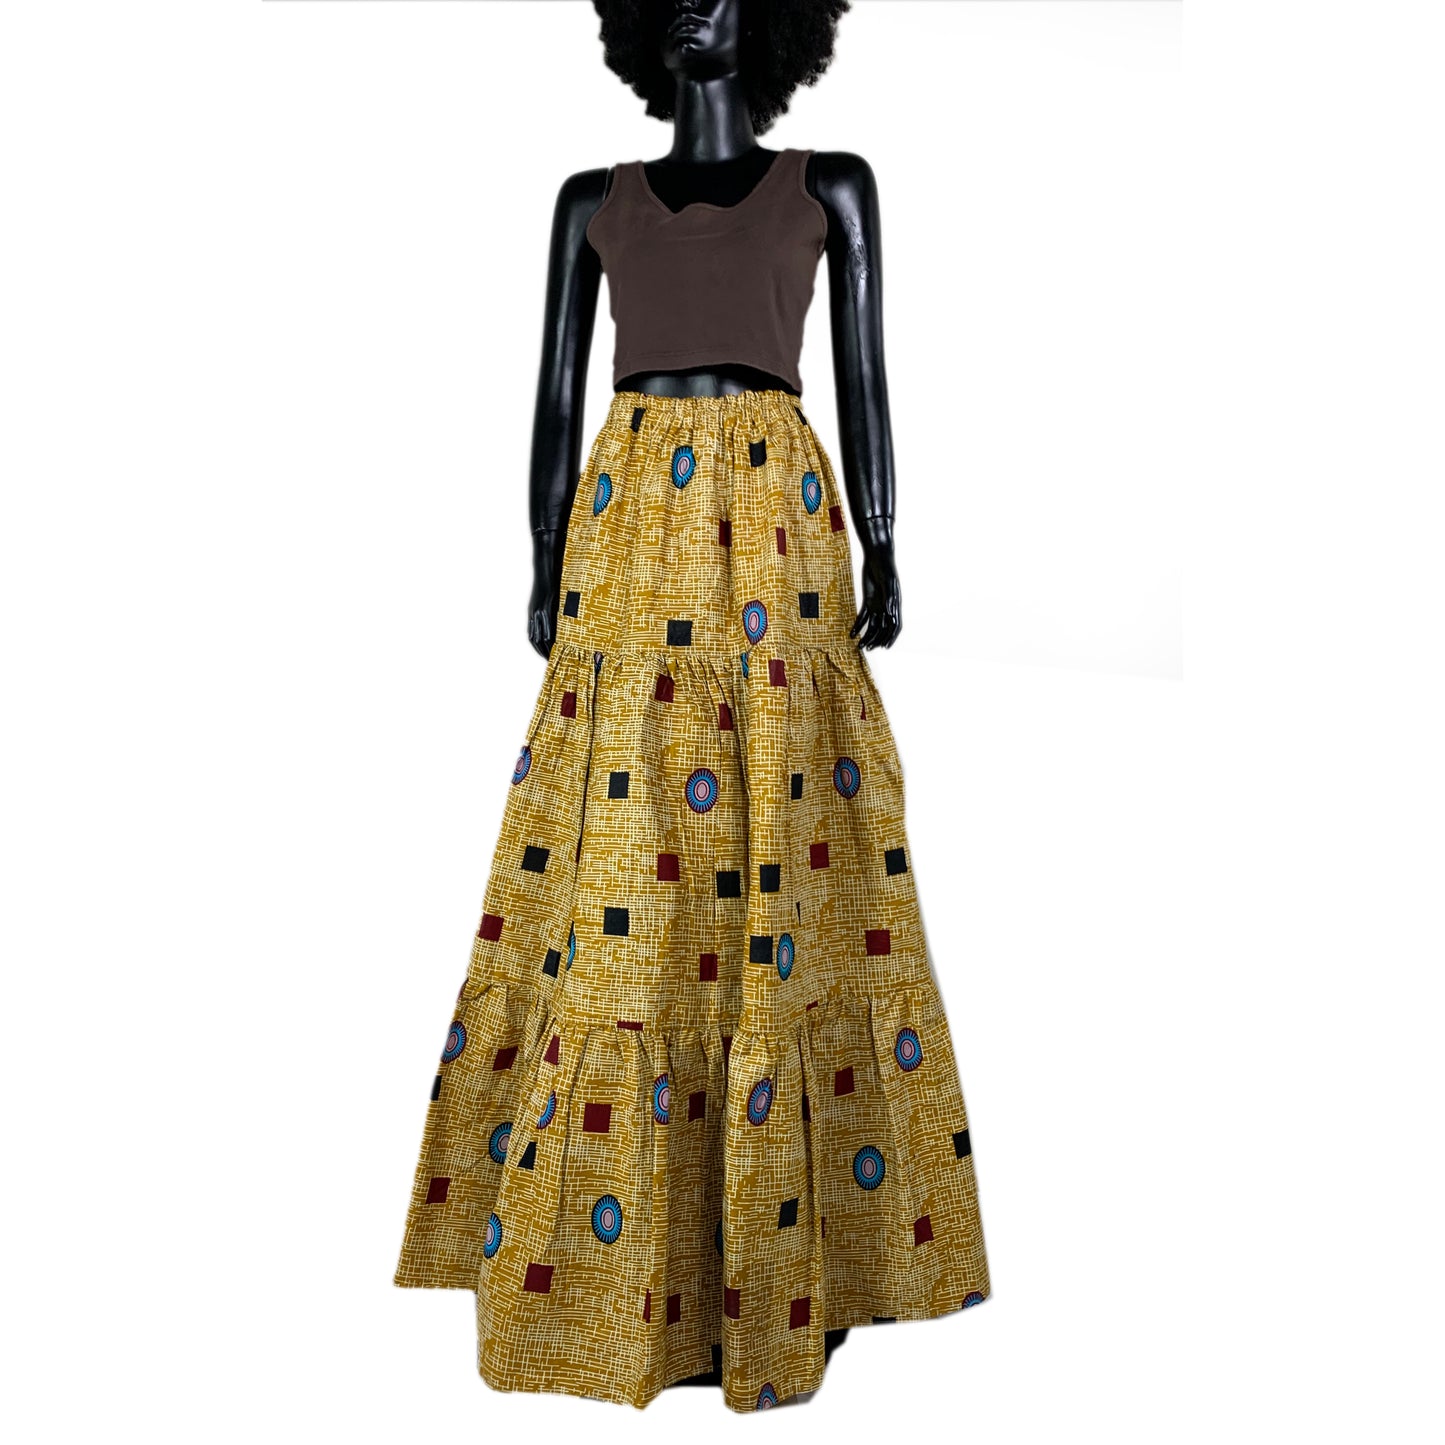 I will take you to my mother African wax skirt